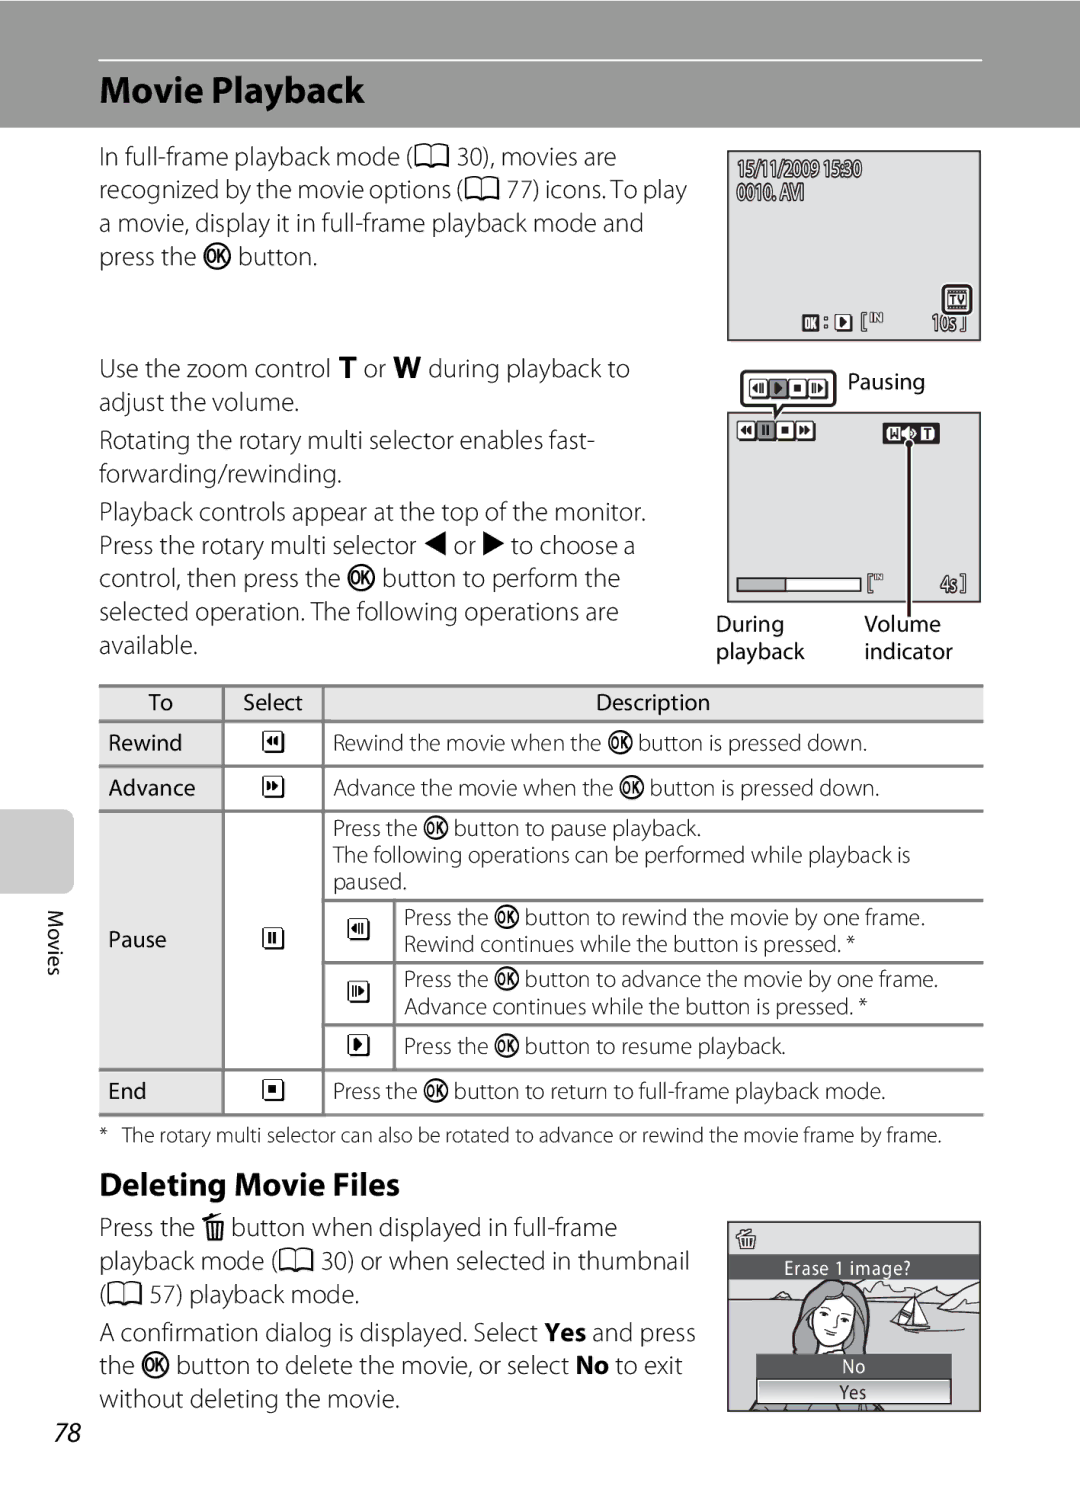 Nortel Networks S640 user manual Movie Playback, Deleting Movie Files 